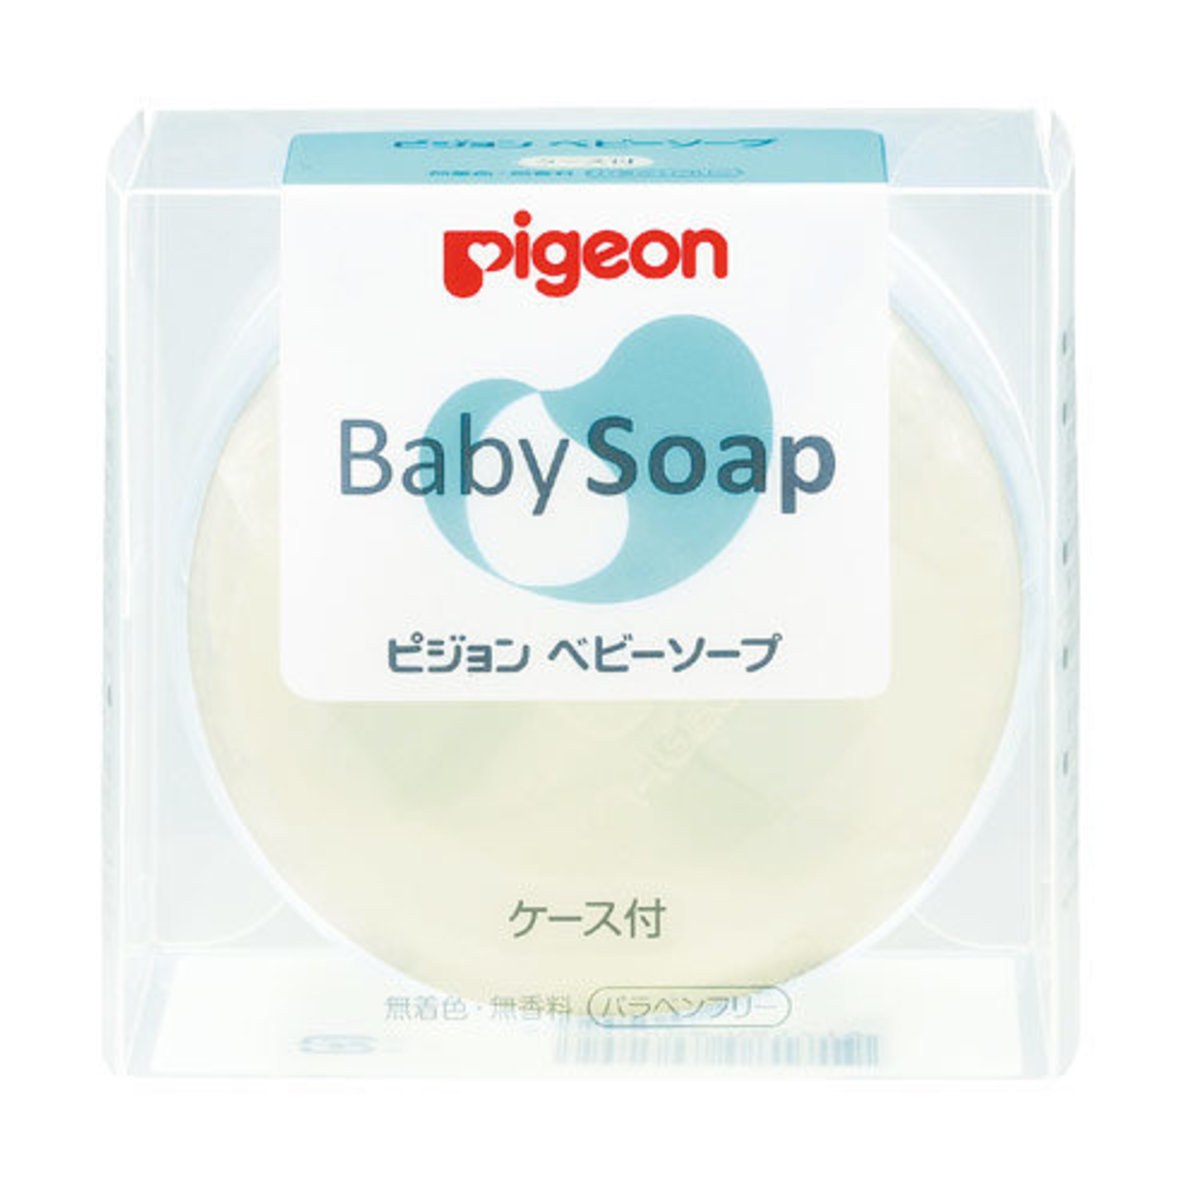 Baby transparent soap 90g (with storage box)